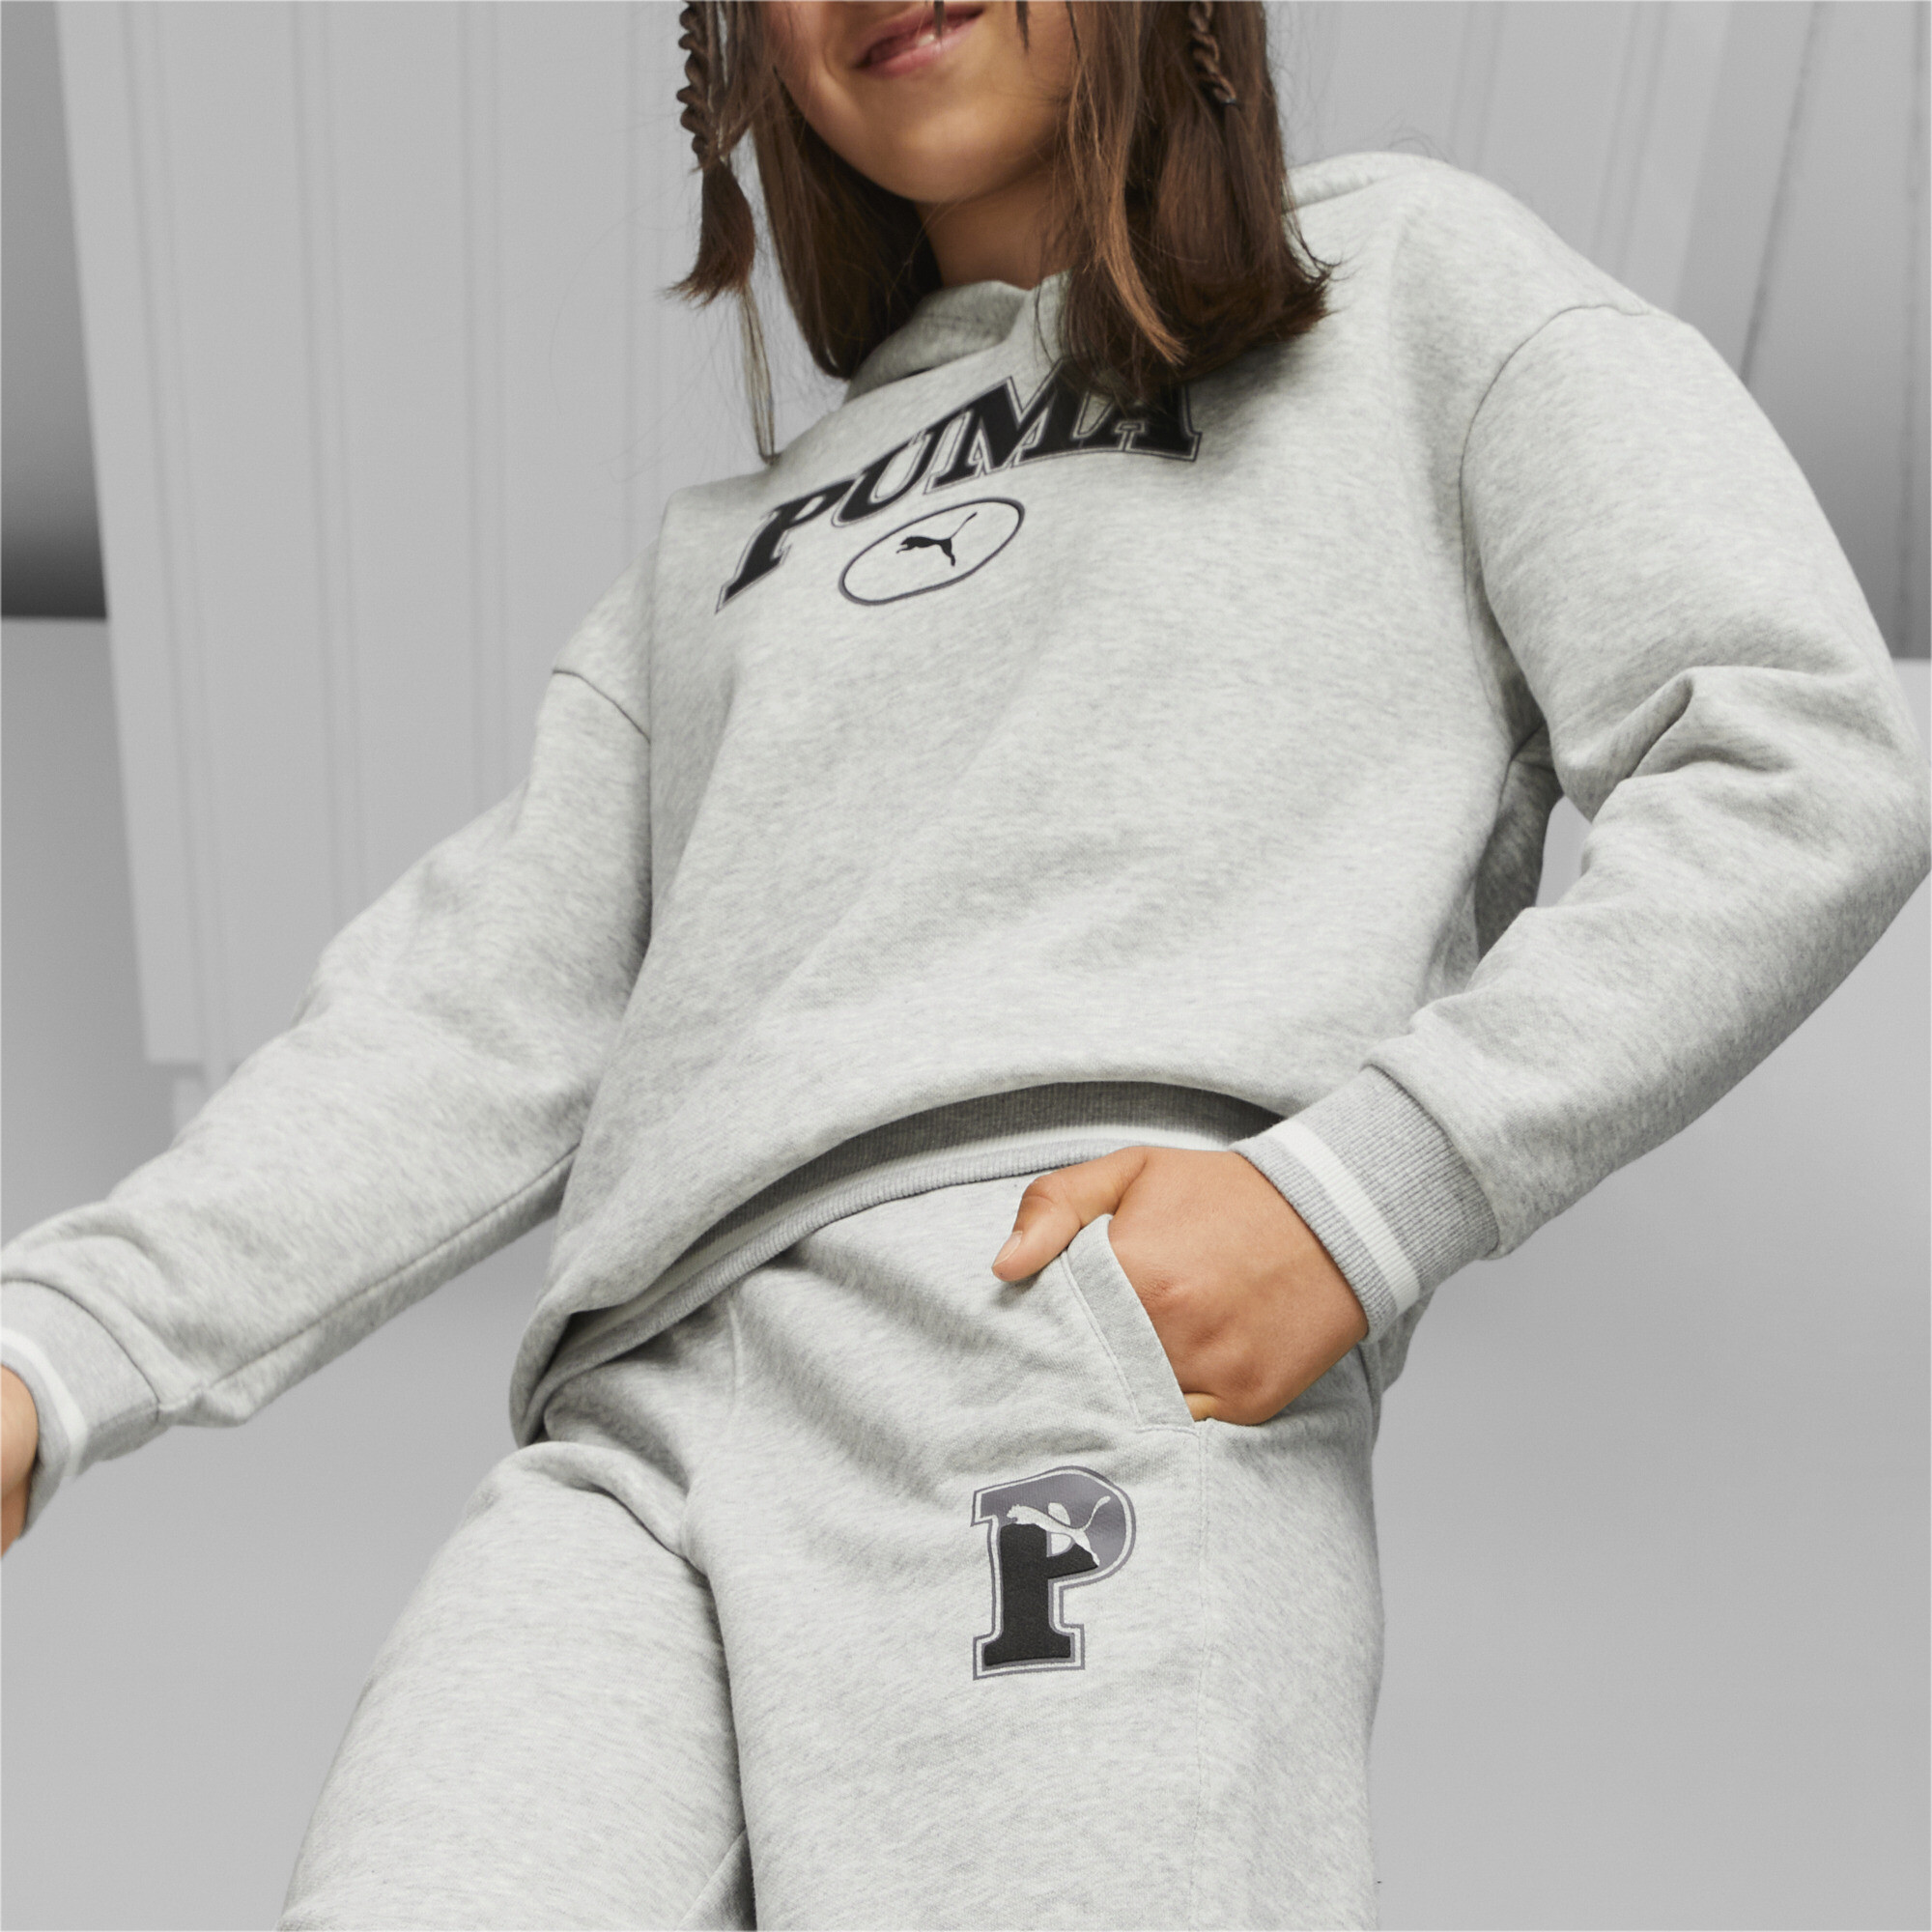 PUMA SQUAD Sweatpants In Heather, Size 9-10 Youth